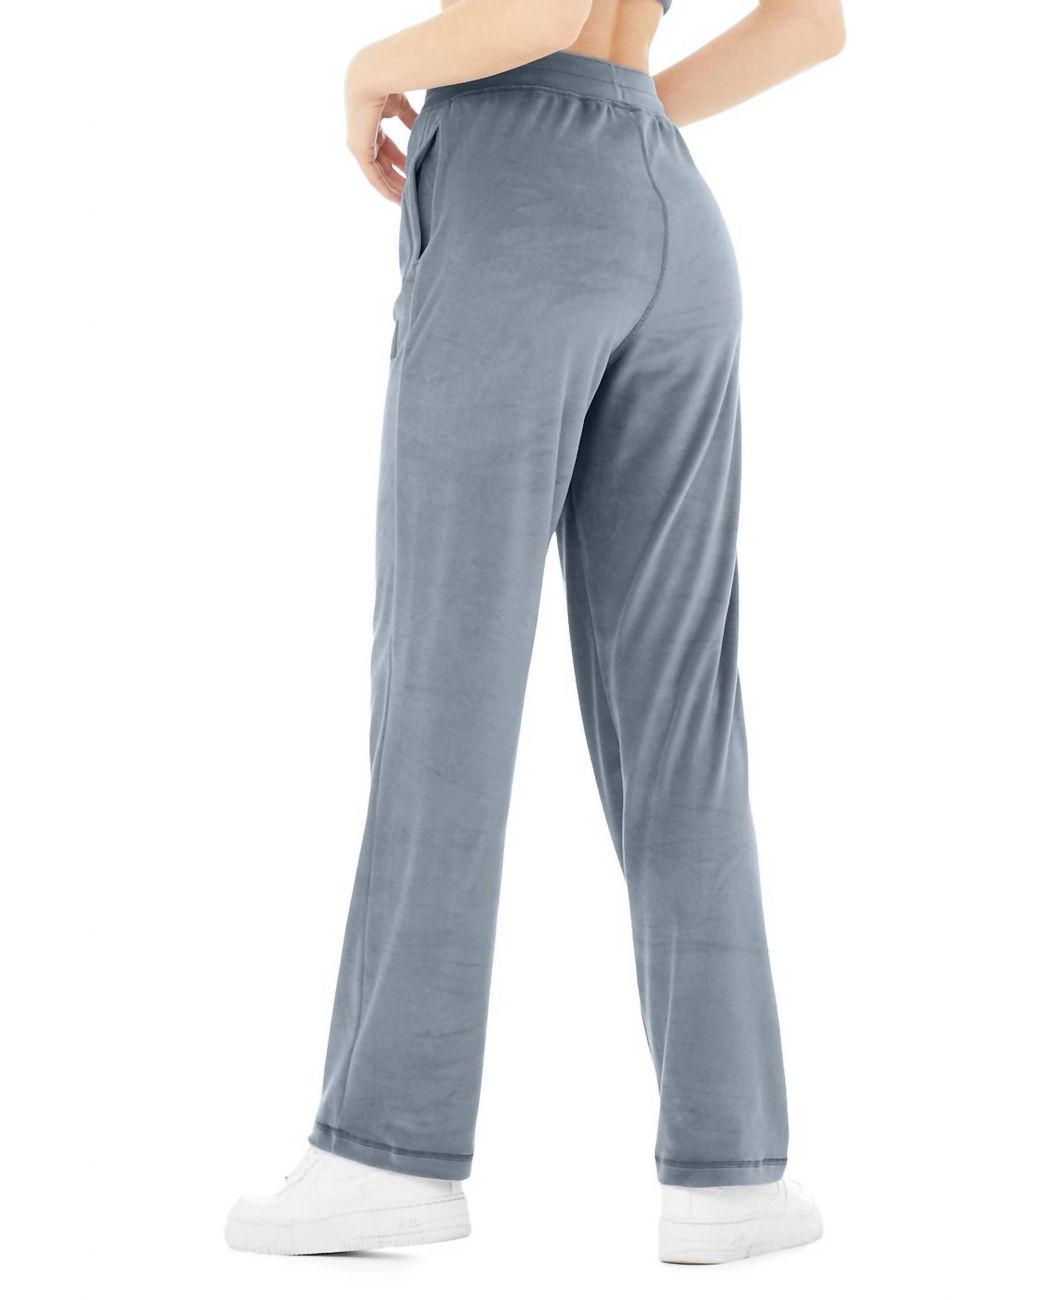 Velour High-Waist Glimmer Wide Leg Pants in Hot Cocoa by Alo Yoga